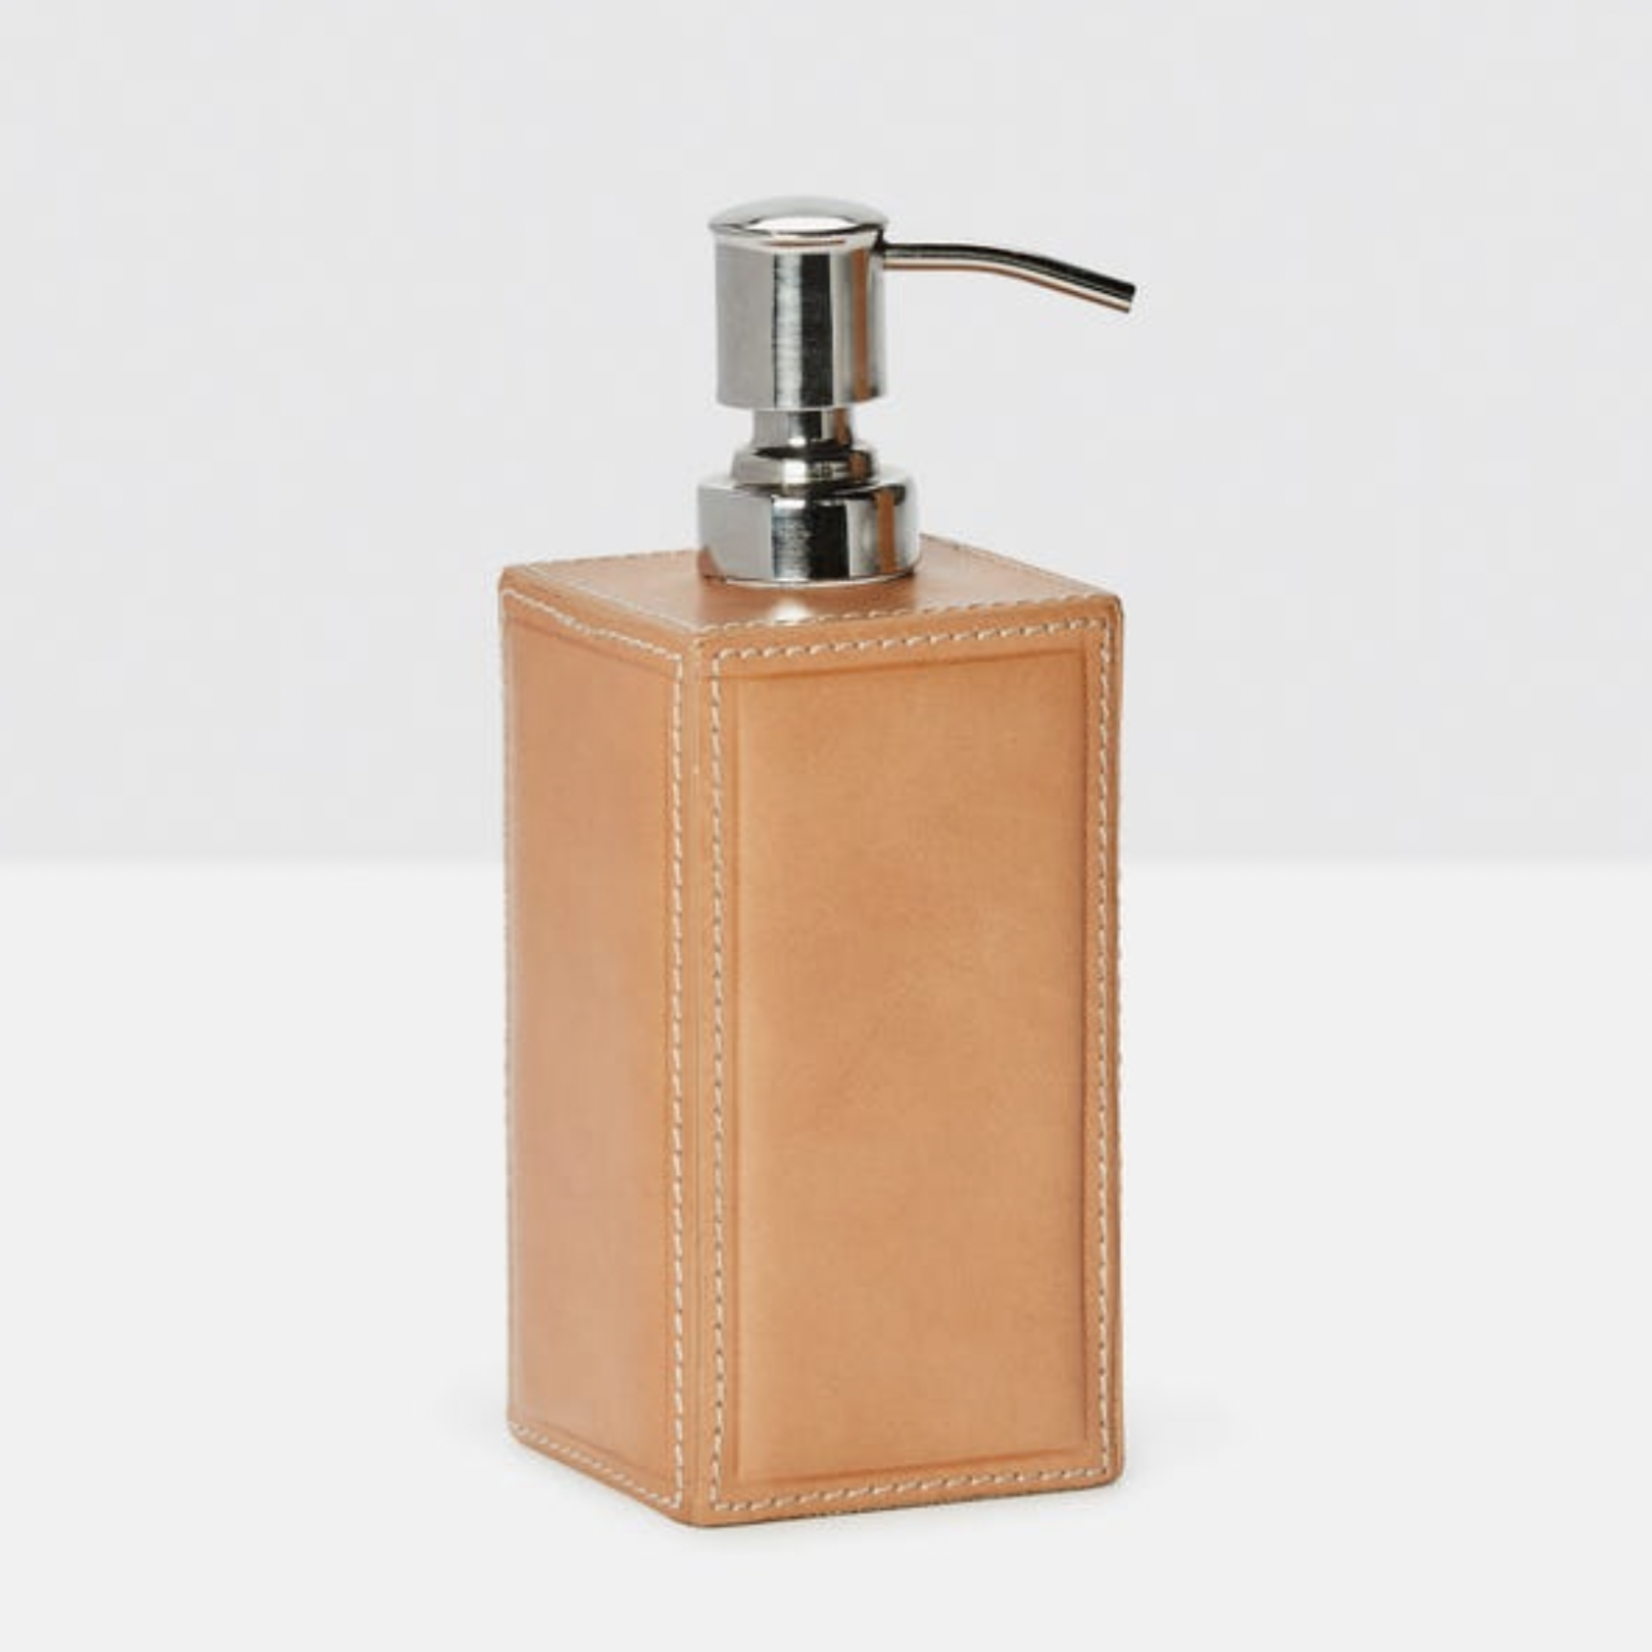 Lorient, Square Soap Pump, Aged Camel Full-Grain Leather